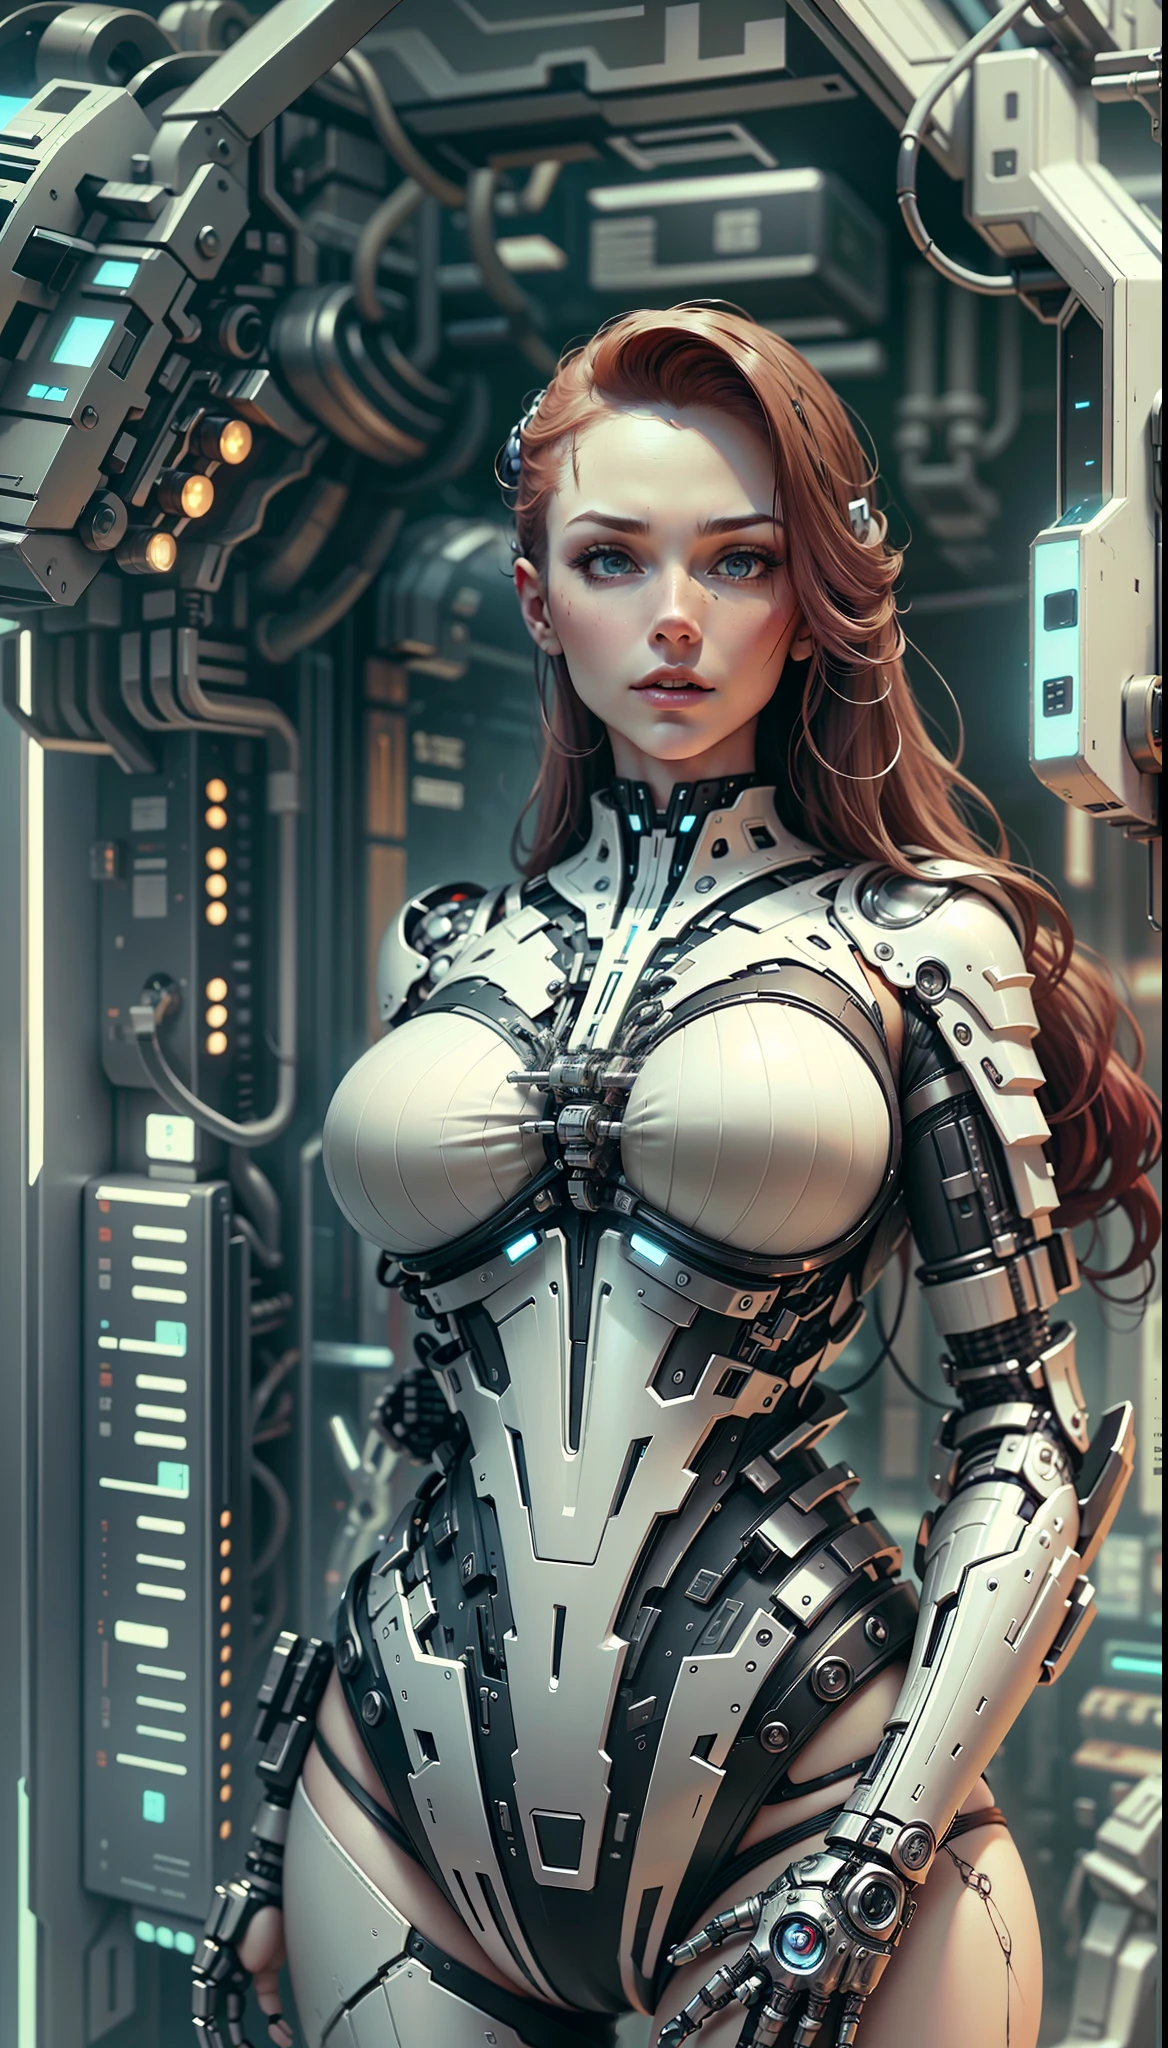 tmasterpiece， white skinned，redheadwear ， The large， Curves and extra-thick breasts， Being Hard， Perfect body， futuristic outfit， Mechanical prosthesis， Cyberpunk scene high-tech，sci-fy，Beautuful Women，scantily clad，Bigchest，Abermaid line，Full body like，battle armor，Erotic lingerie，stocklings，nakeness，Do not wear，scantily clad，sexyposture，Sultry